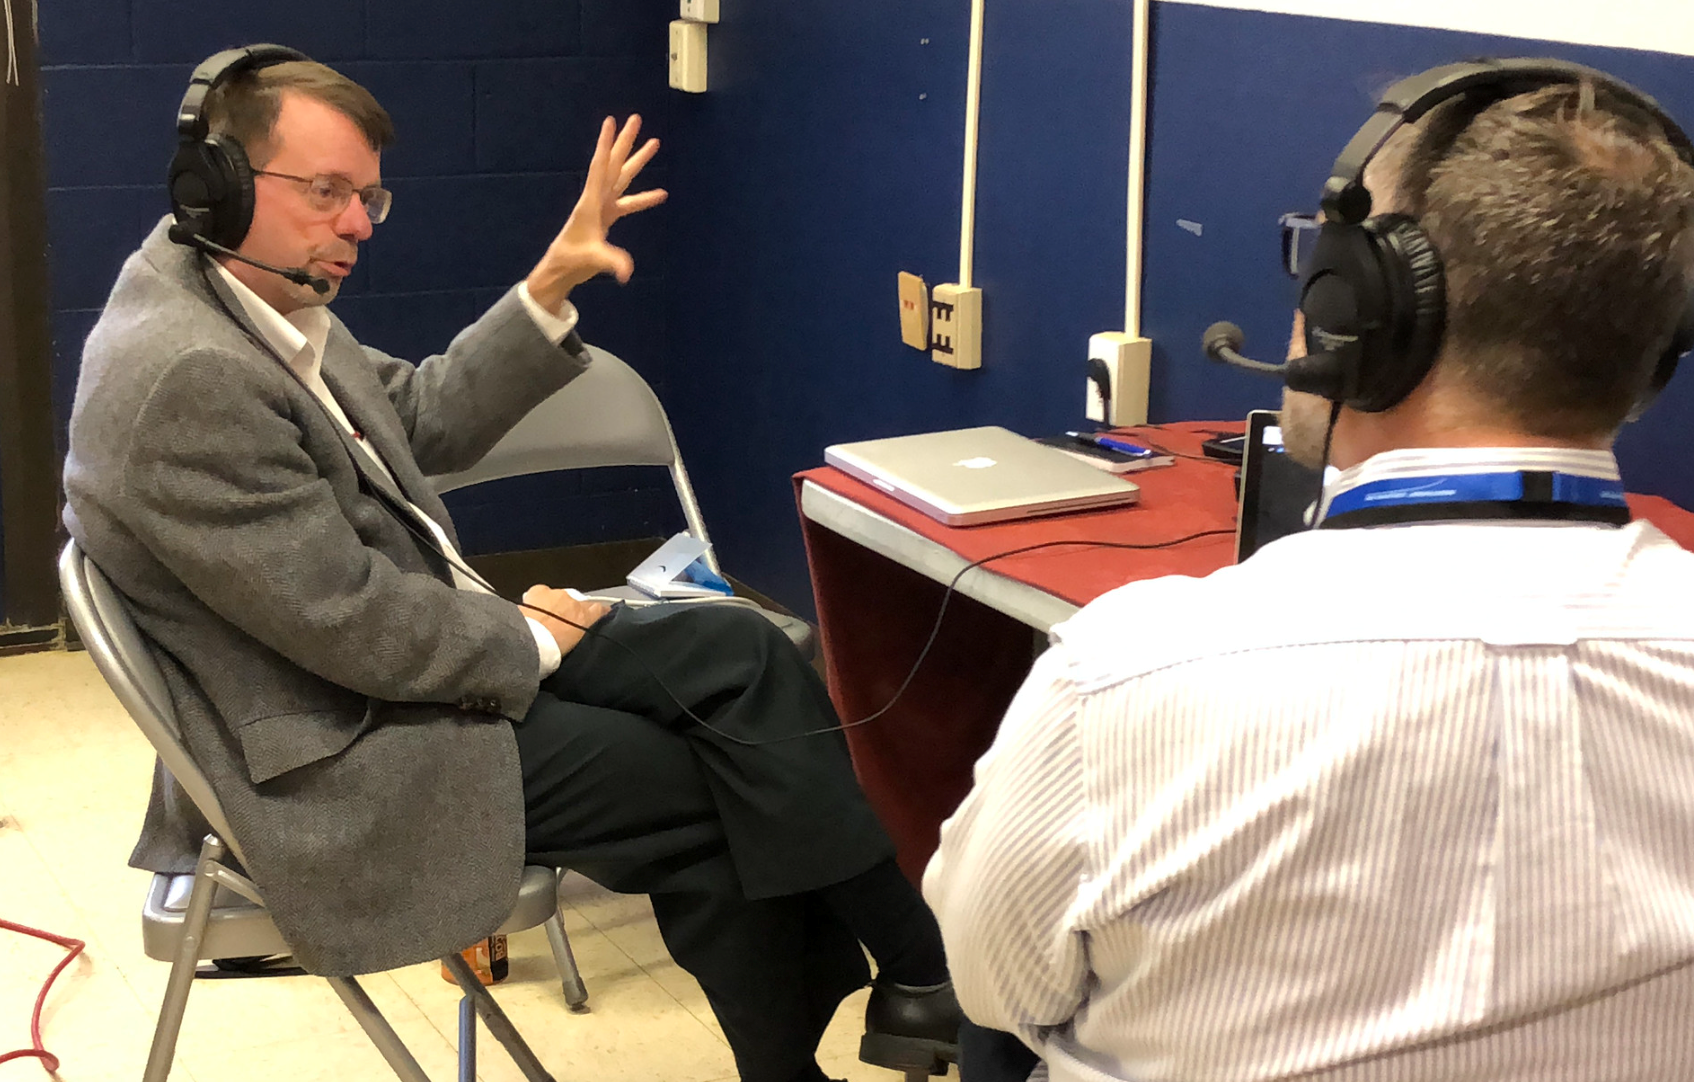 Keith Koehler, a white man with short brown hair and beard, sits in a chair and gestures with one hand while doing a radio interview. He wears headphones, a taupe jacket, and dark pants.